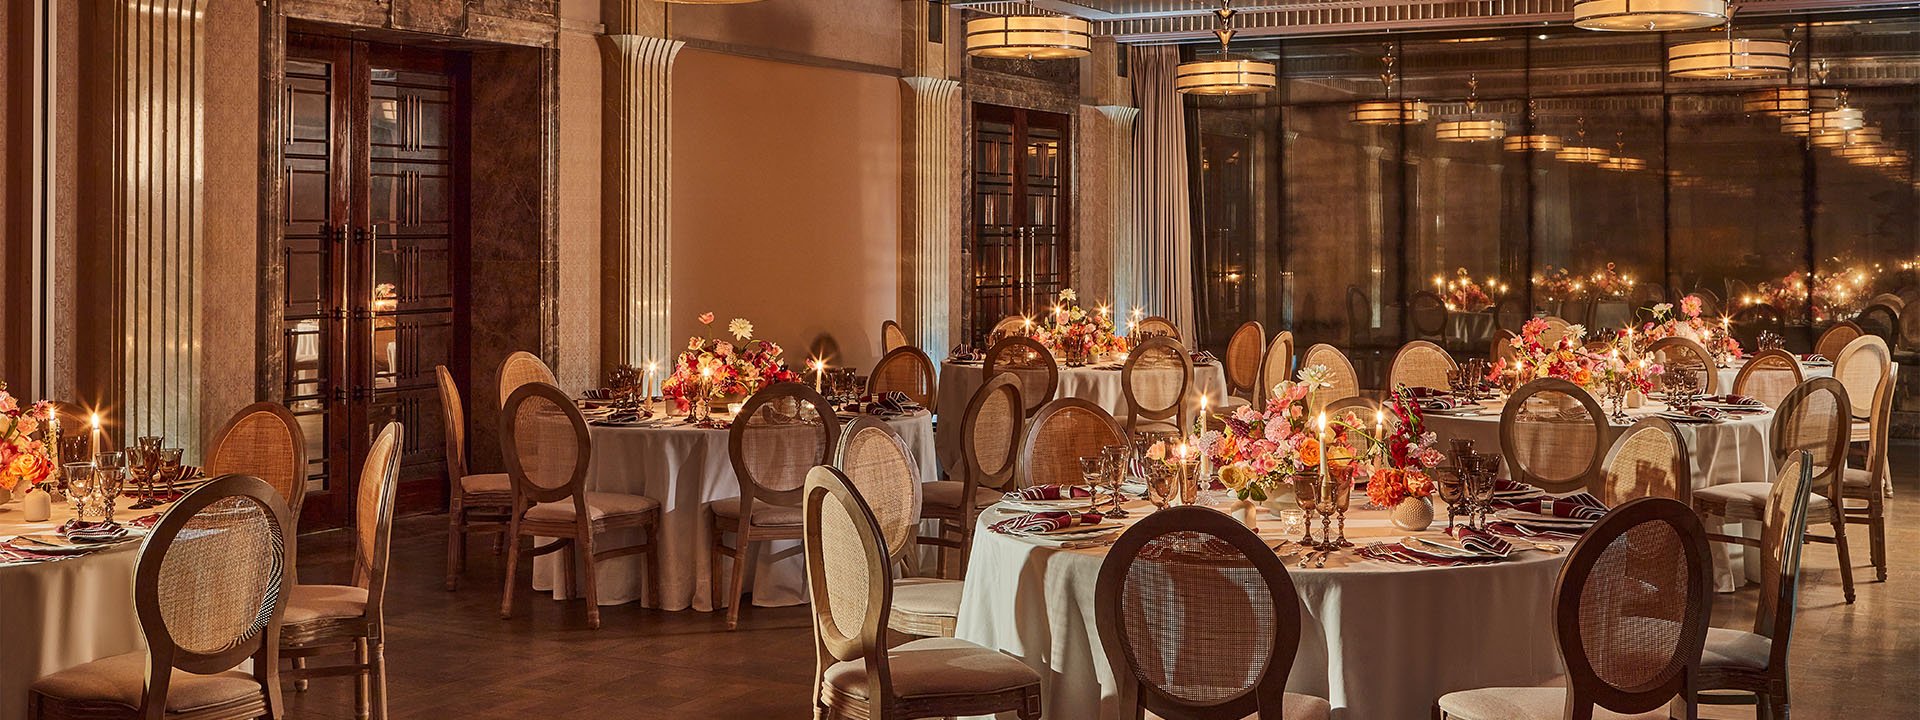 A luxurious dining room is elegantly set for an event, featuring round tables with white tablecloths, floral centerpieces, and candlelight, surrounded by stylish chairs with wicker backs.